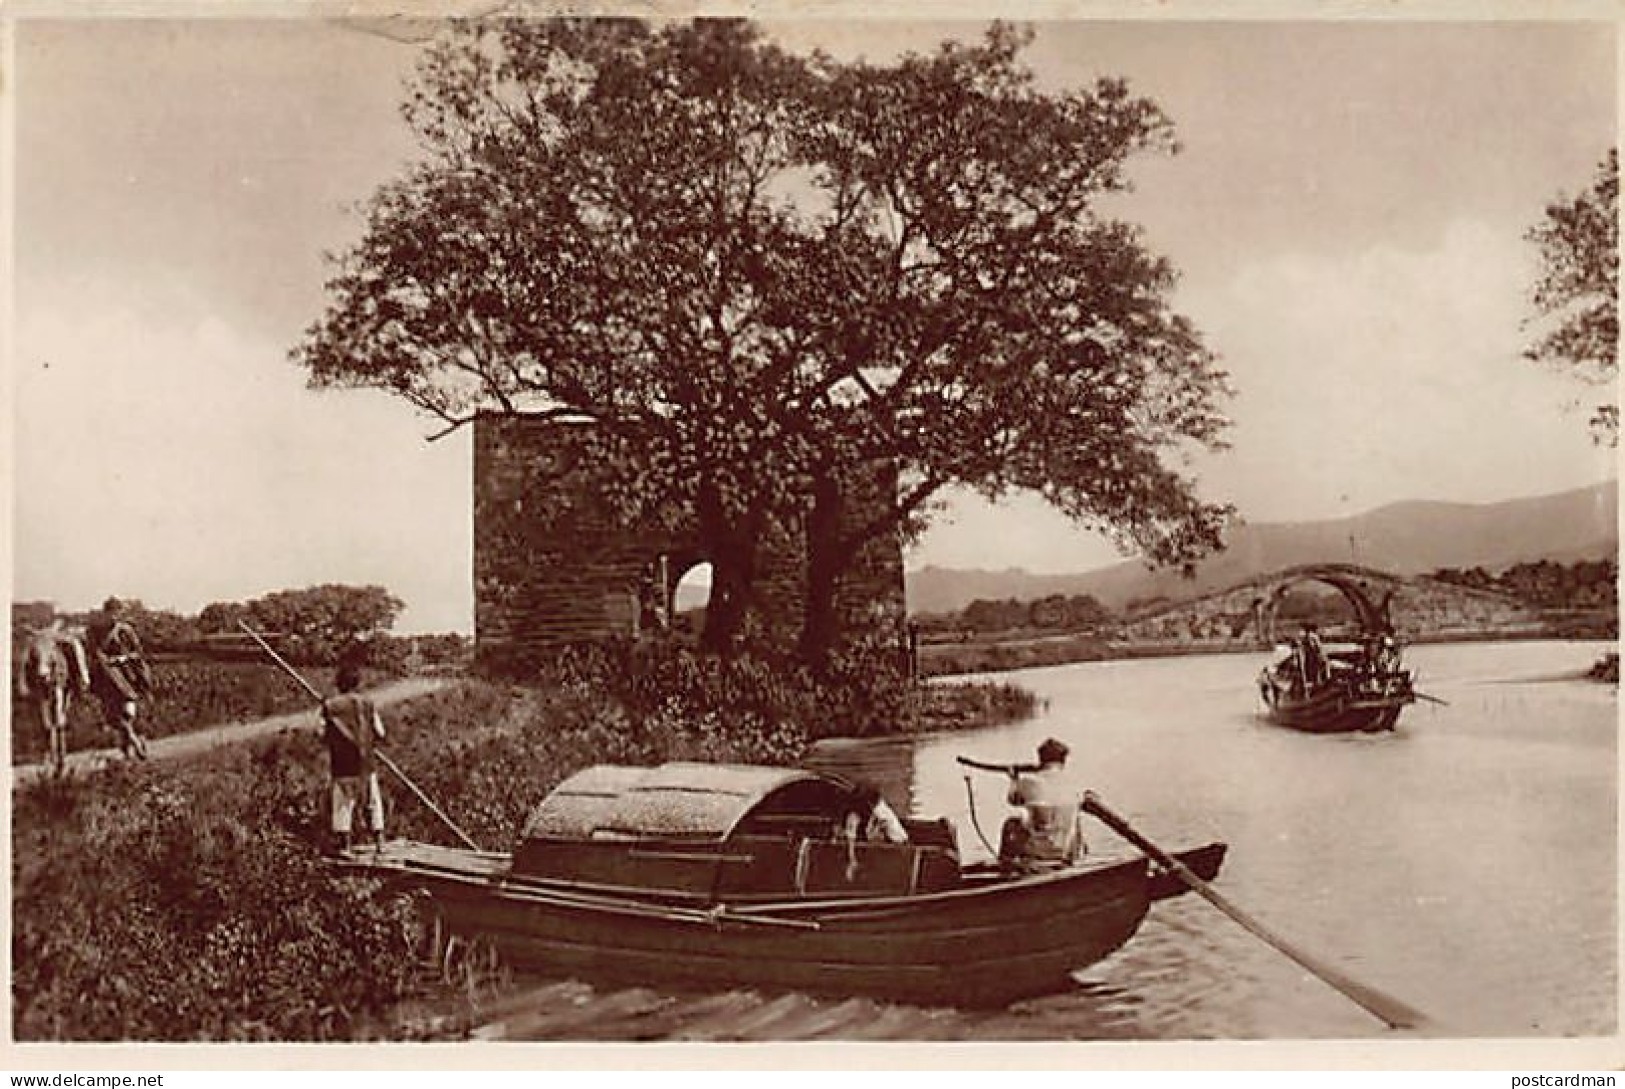 China - SHANGHAI - Near Soochow (Suzhou) - Publ. Young Photo Co. - The Universal Postcard & Picture Co. 553 - China